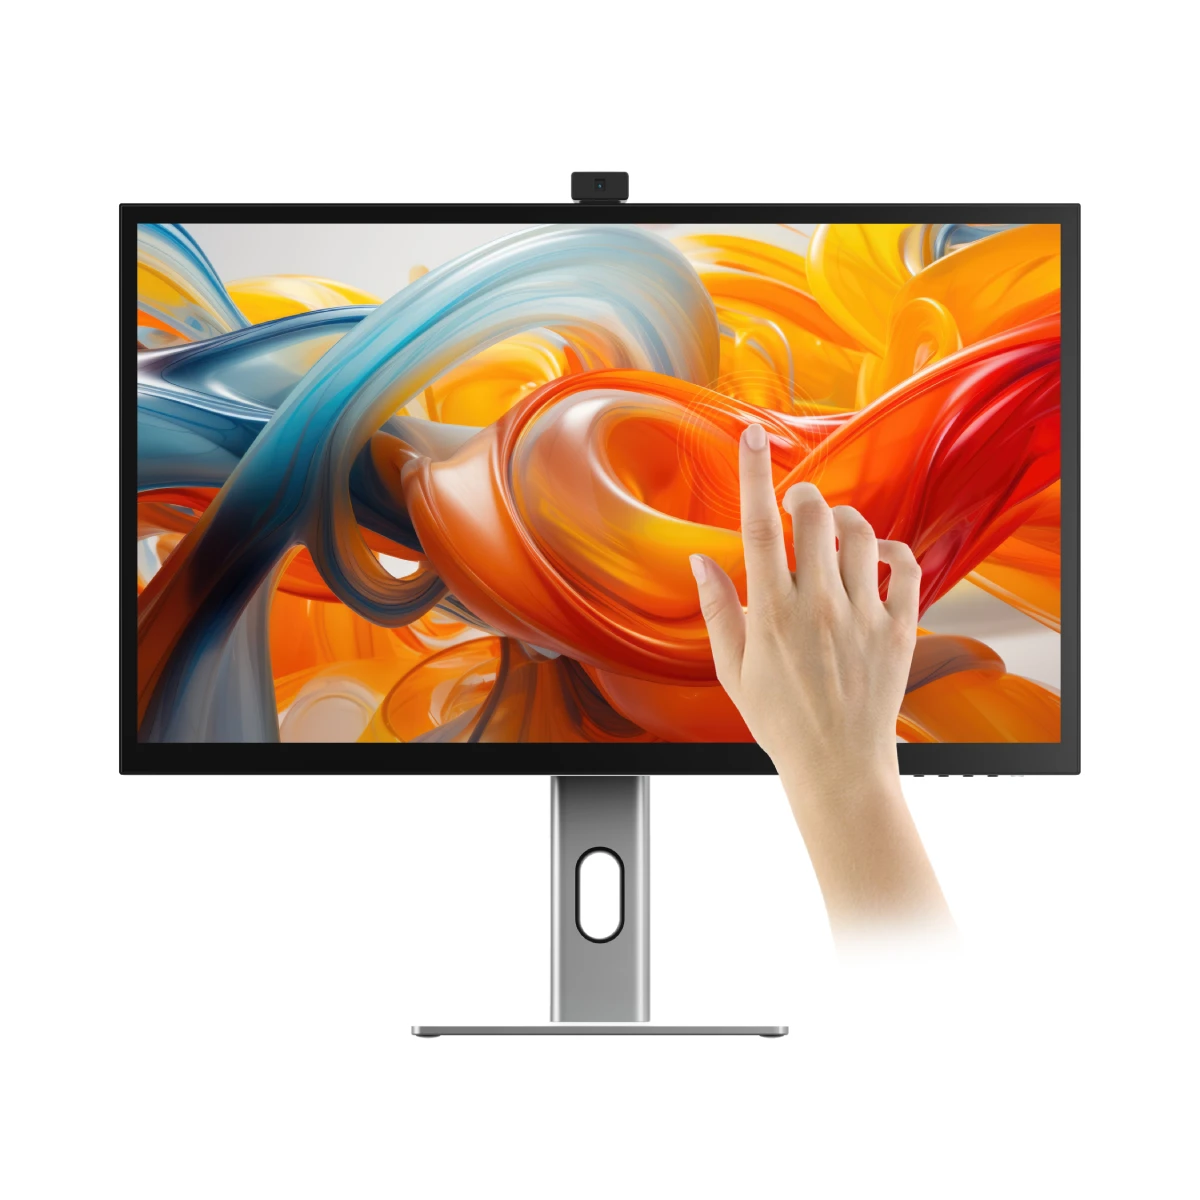 clarity-pro-touch-27-uhd-4k-monitor-with-65w-pd-webcam-and-touchscreen-dual-4k-universal-docking-station-hdmi-edition_2